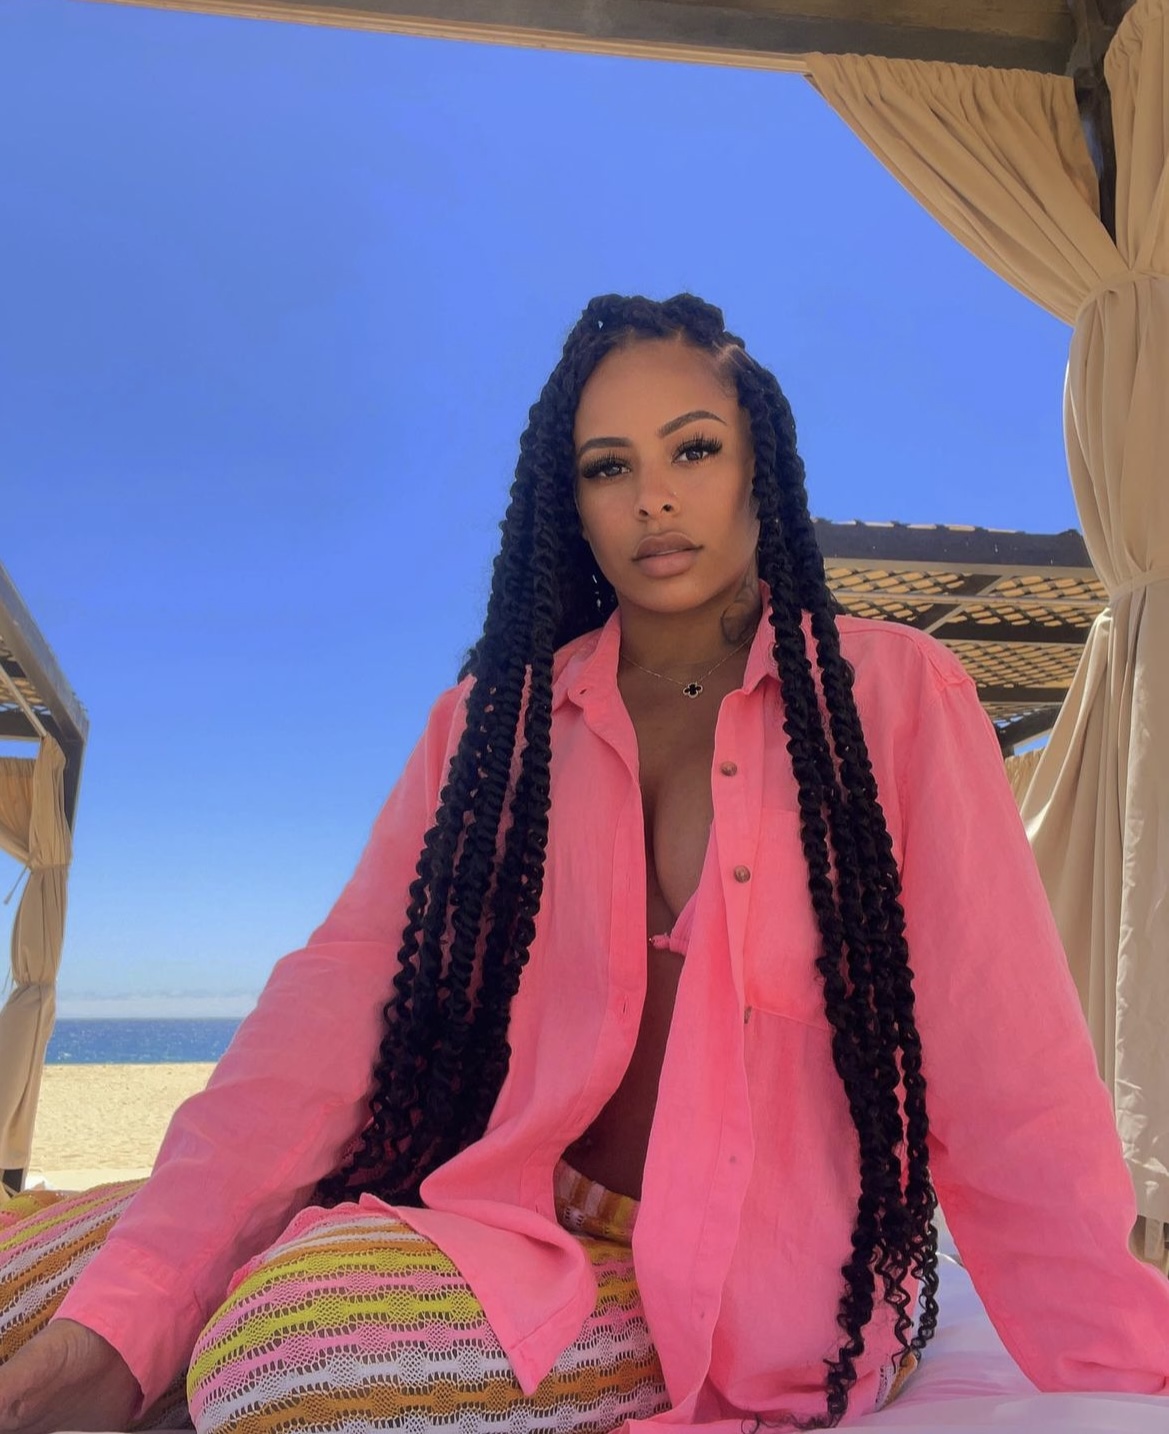 Alexis Love Porn Model - Love & Hip Hop' Star Alexis Skyy Opens Up About What Led To Her Spiritual  Journey: 'I Felt Like I Was Going Crazy' - theJasmineBRAND